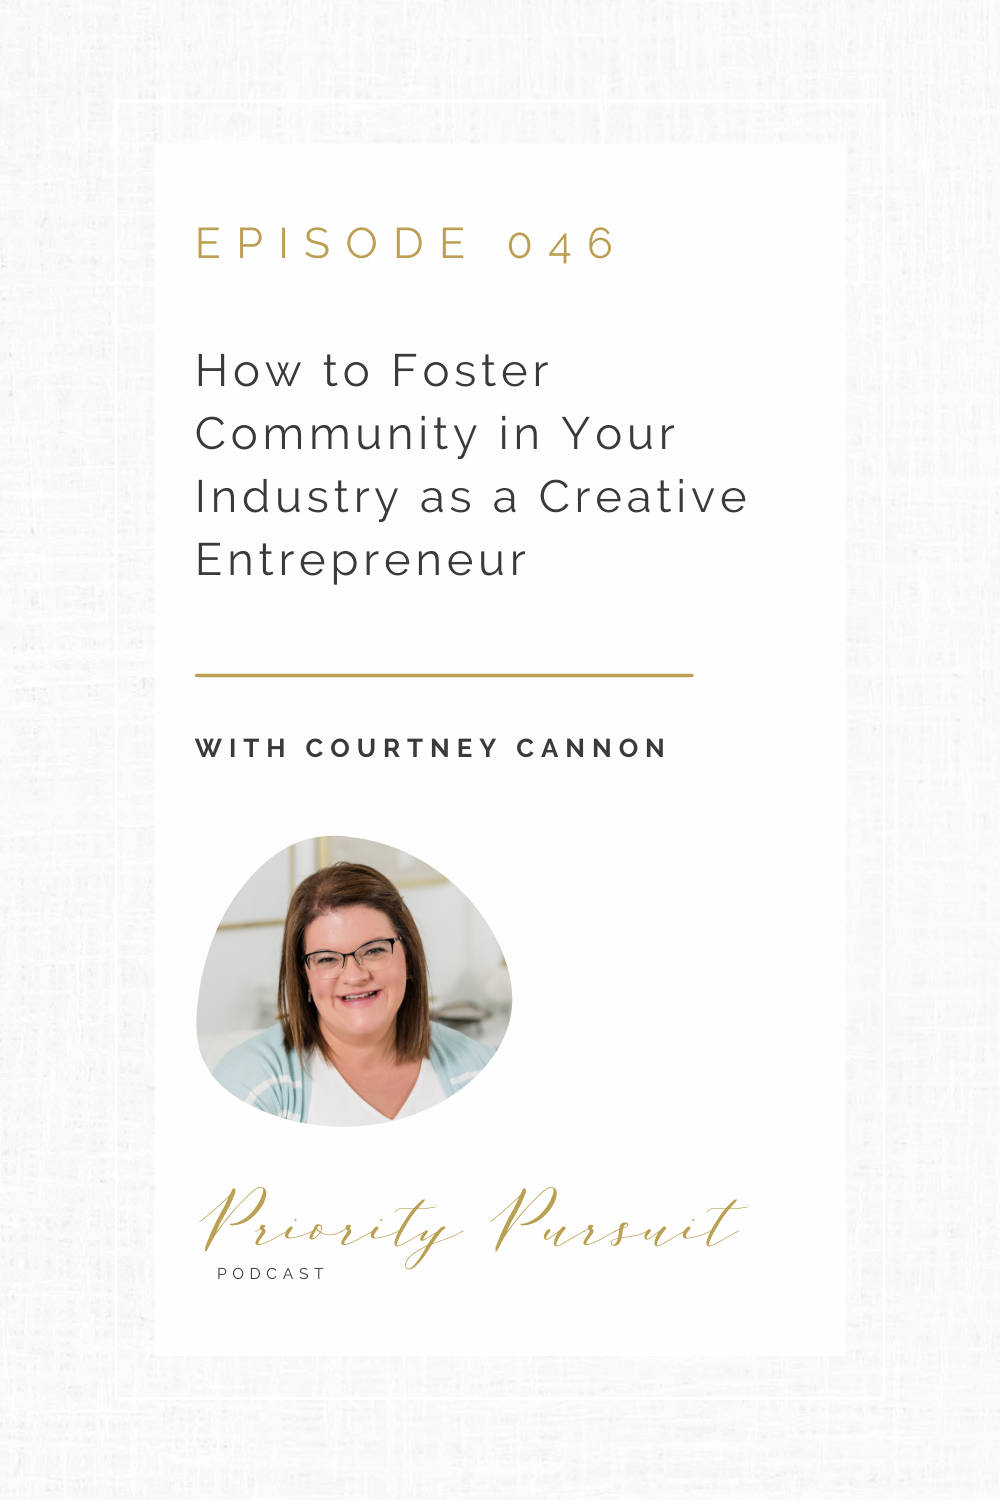  Victoria Rayburn and Courtney Cannon discuss how to foster community in your industry as a creative entrepreneur